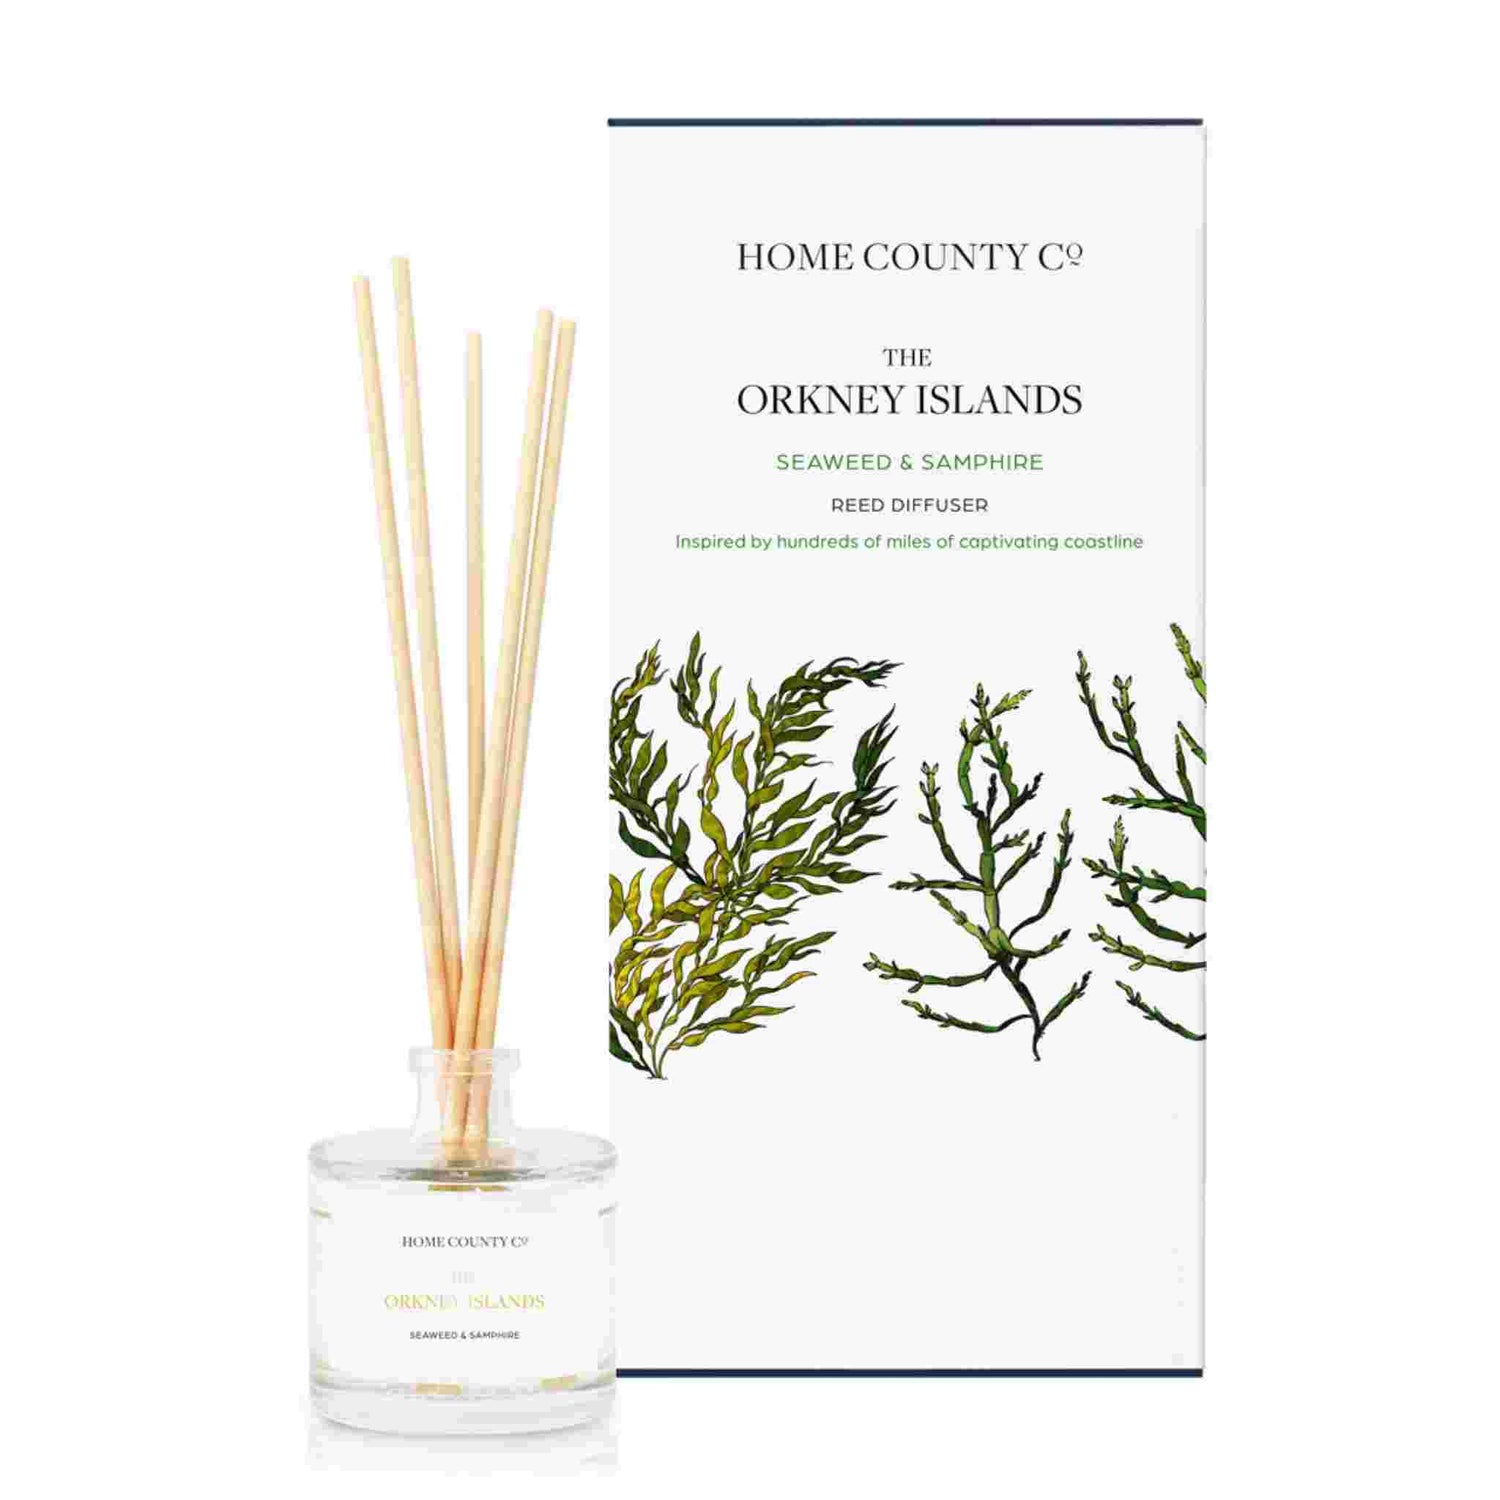 A seaweed and samphire scented reed diffuser from Home County Co. The vegan friendly reed diffuser is shown next to the eco friendly reed diffuser box packaging.